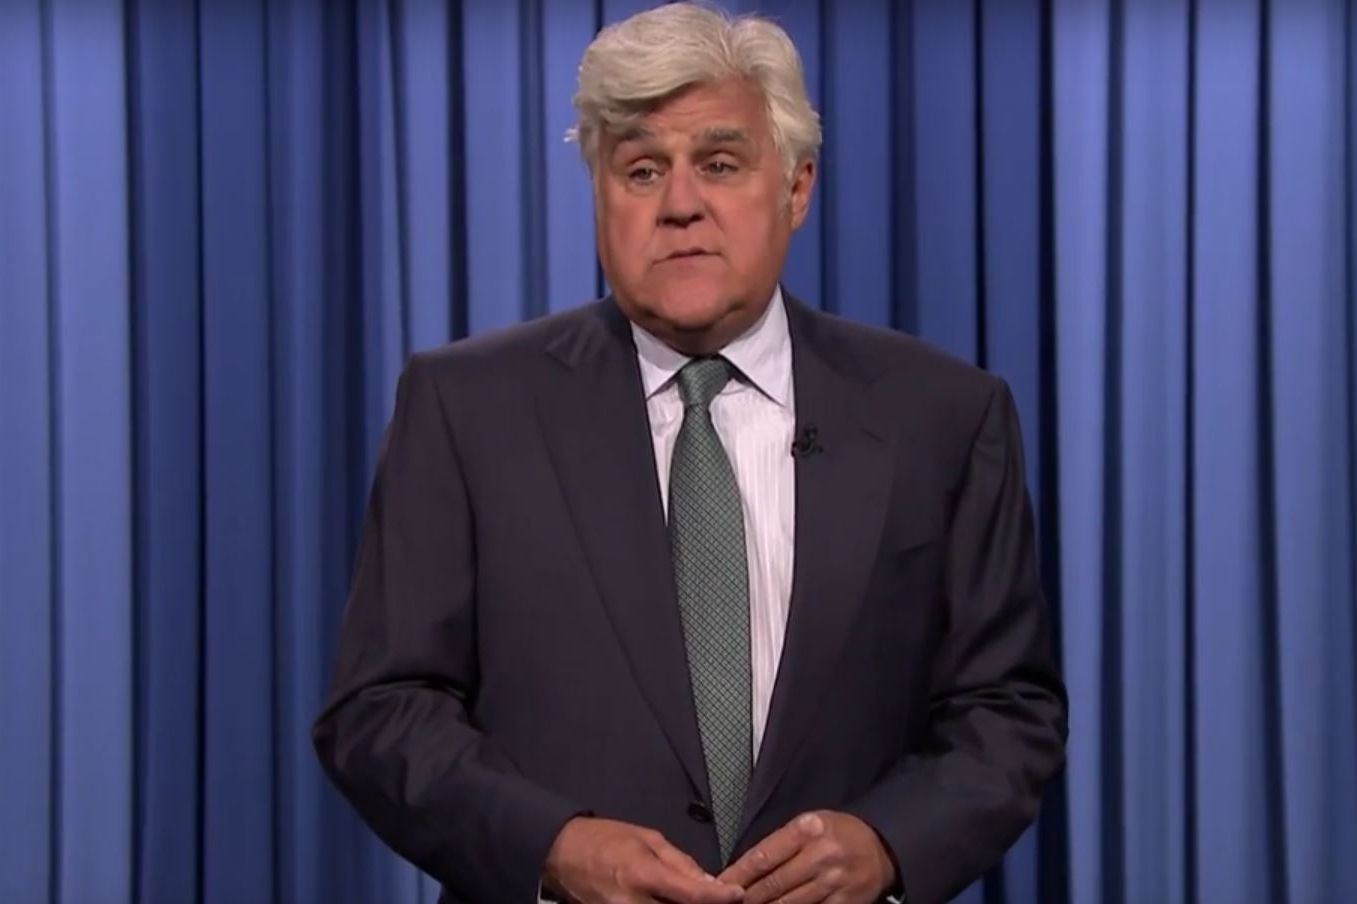 Jay Leno: The King of Late Night Returns - The Forest At Duke